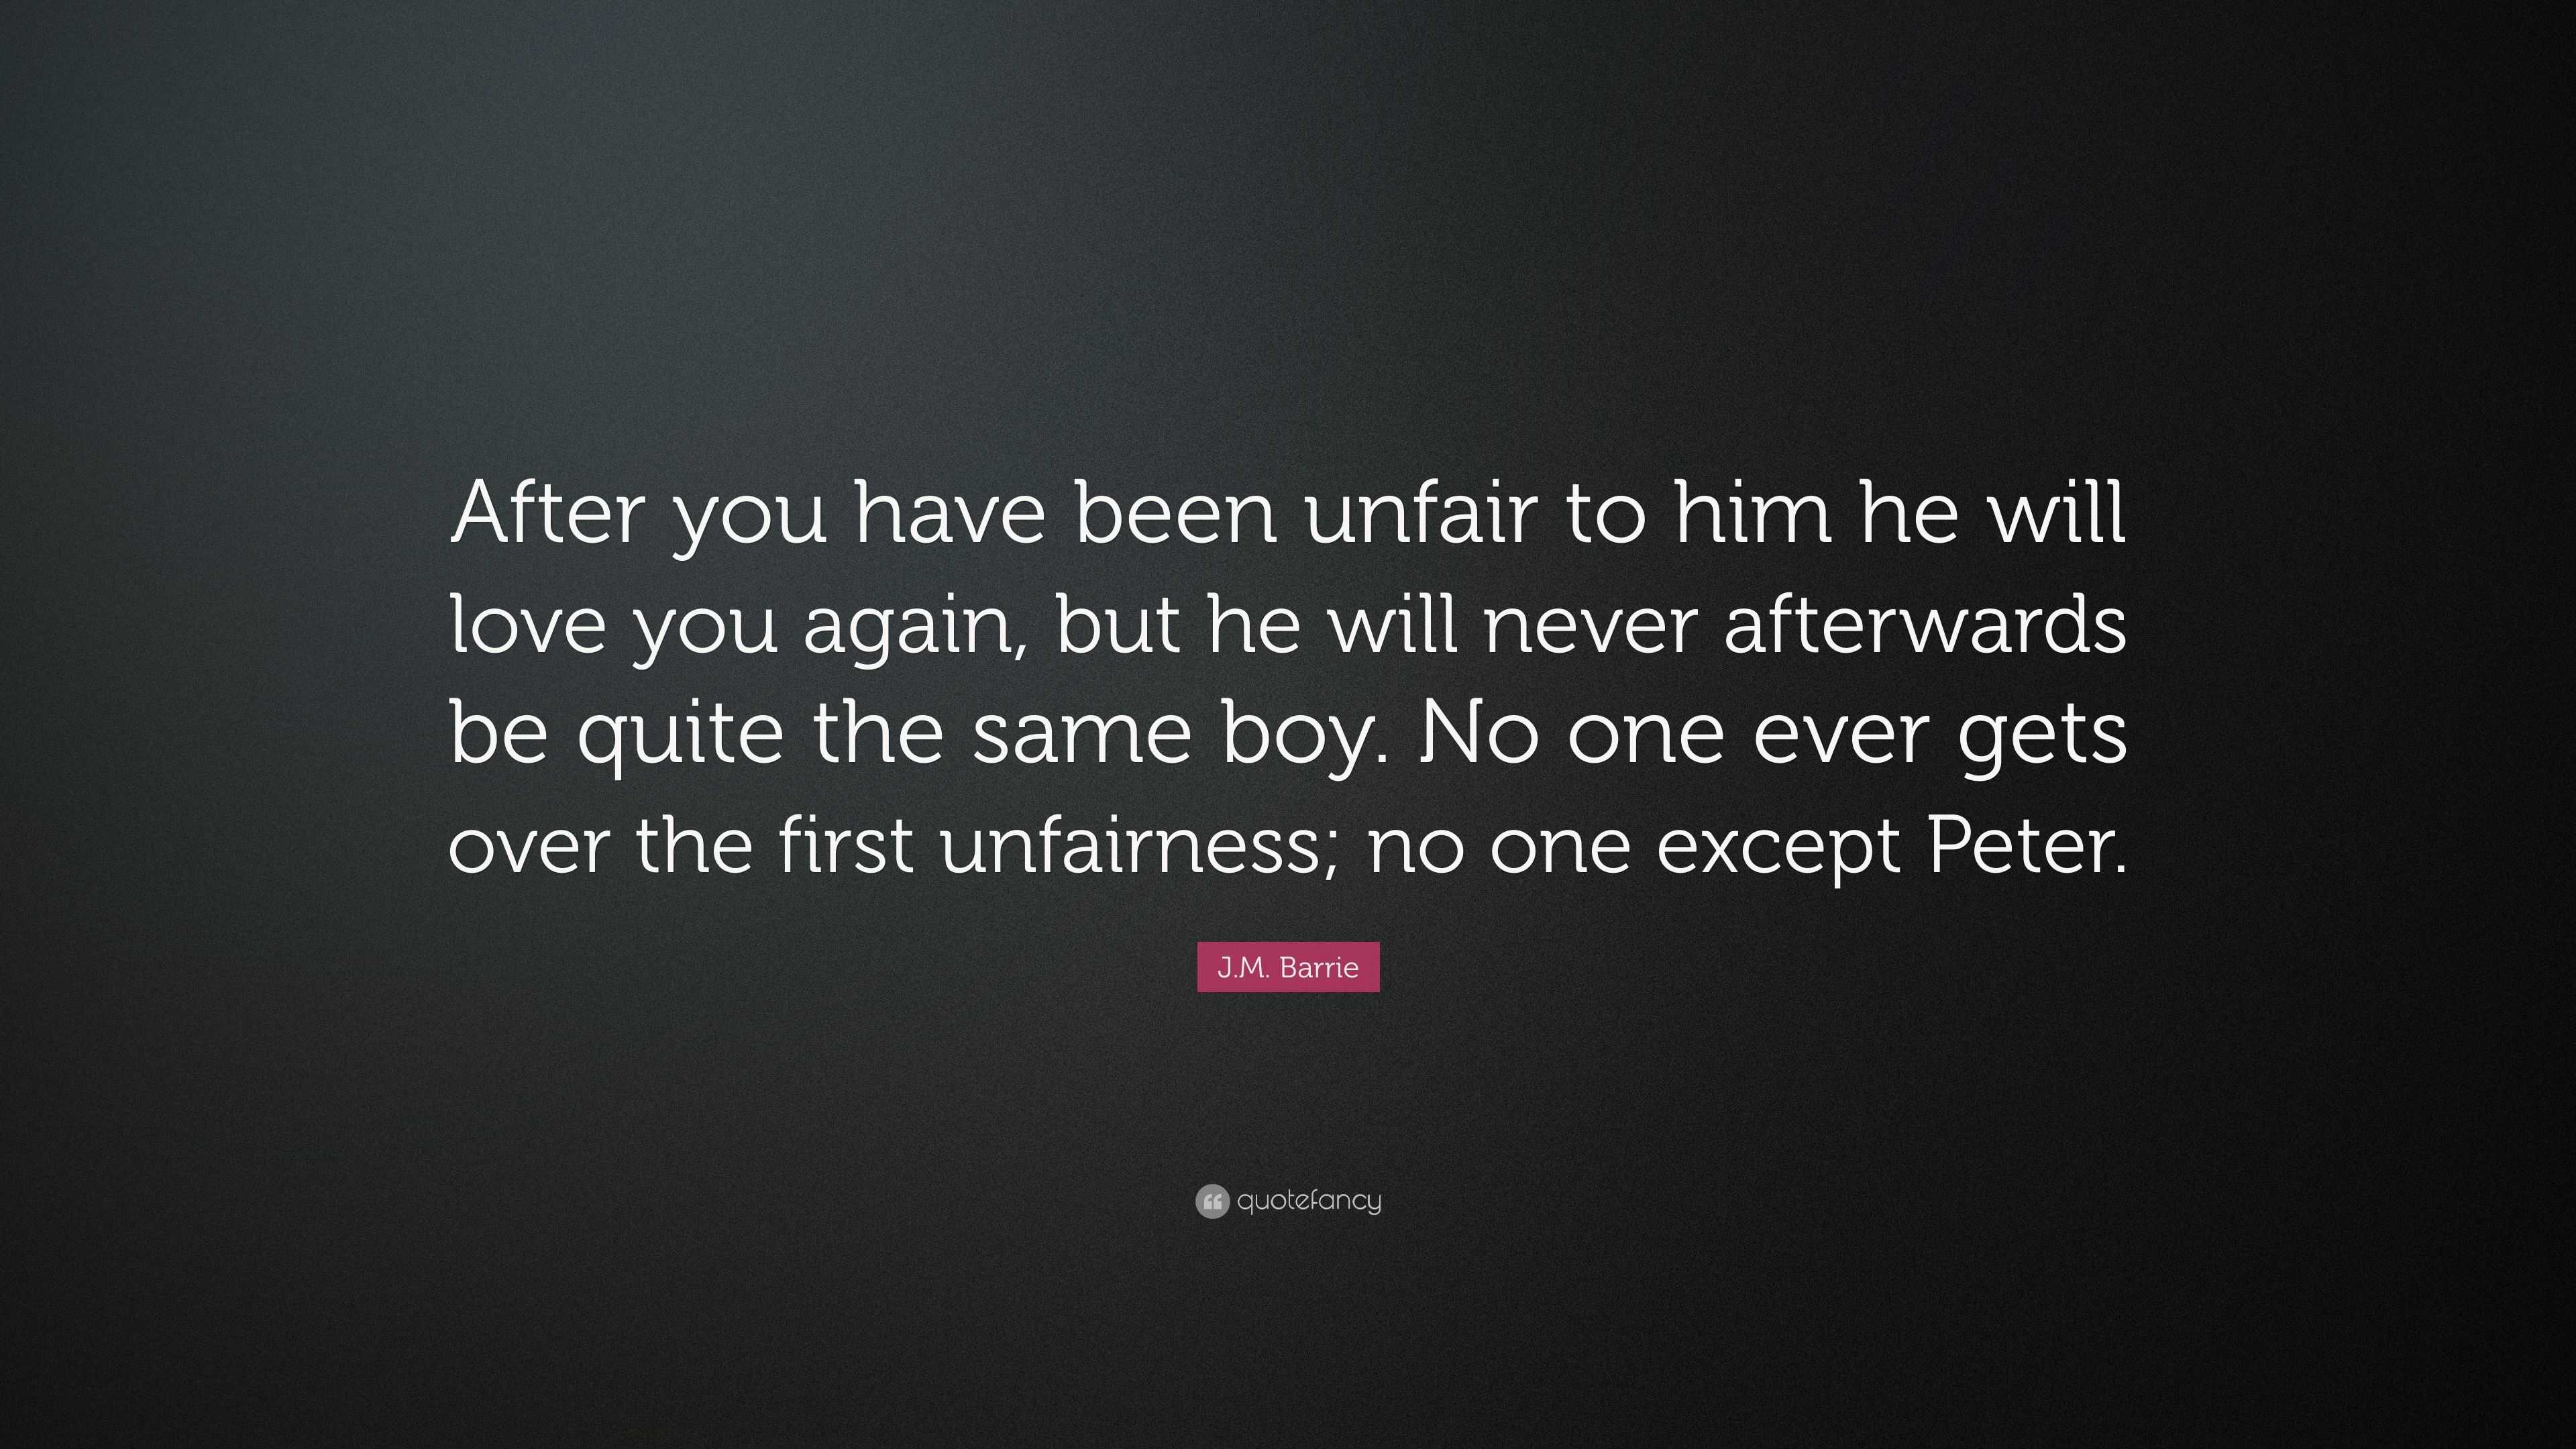 J M Barrie Quote “After you have been unfair to him he will love you